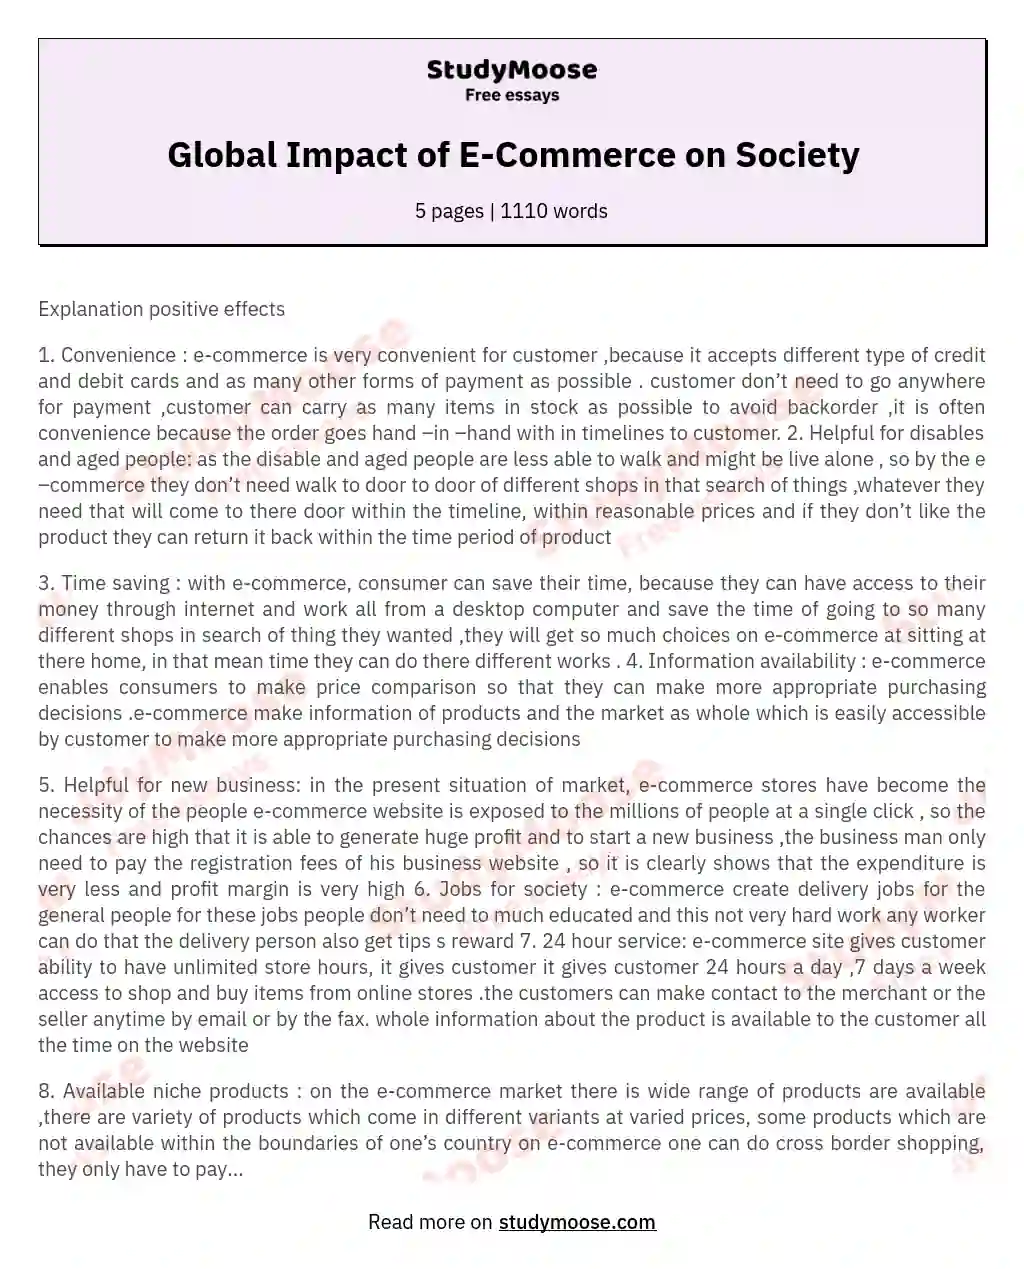 Global Impact of E-Commerce on Society essay